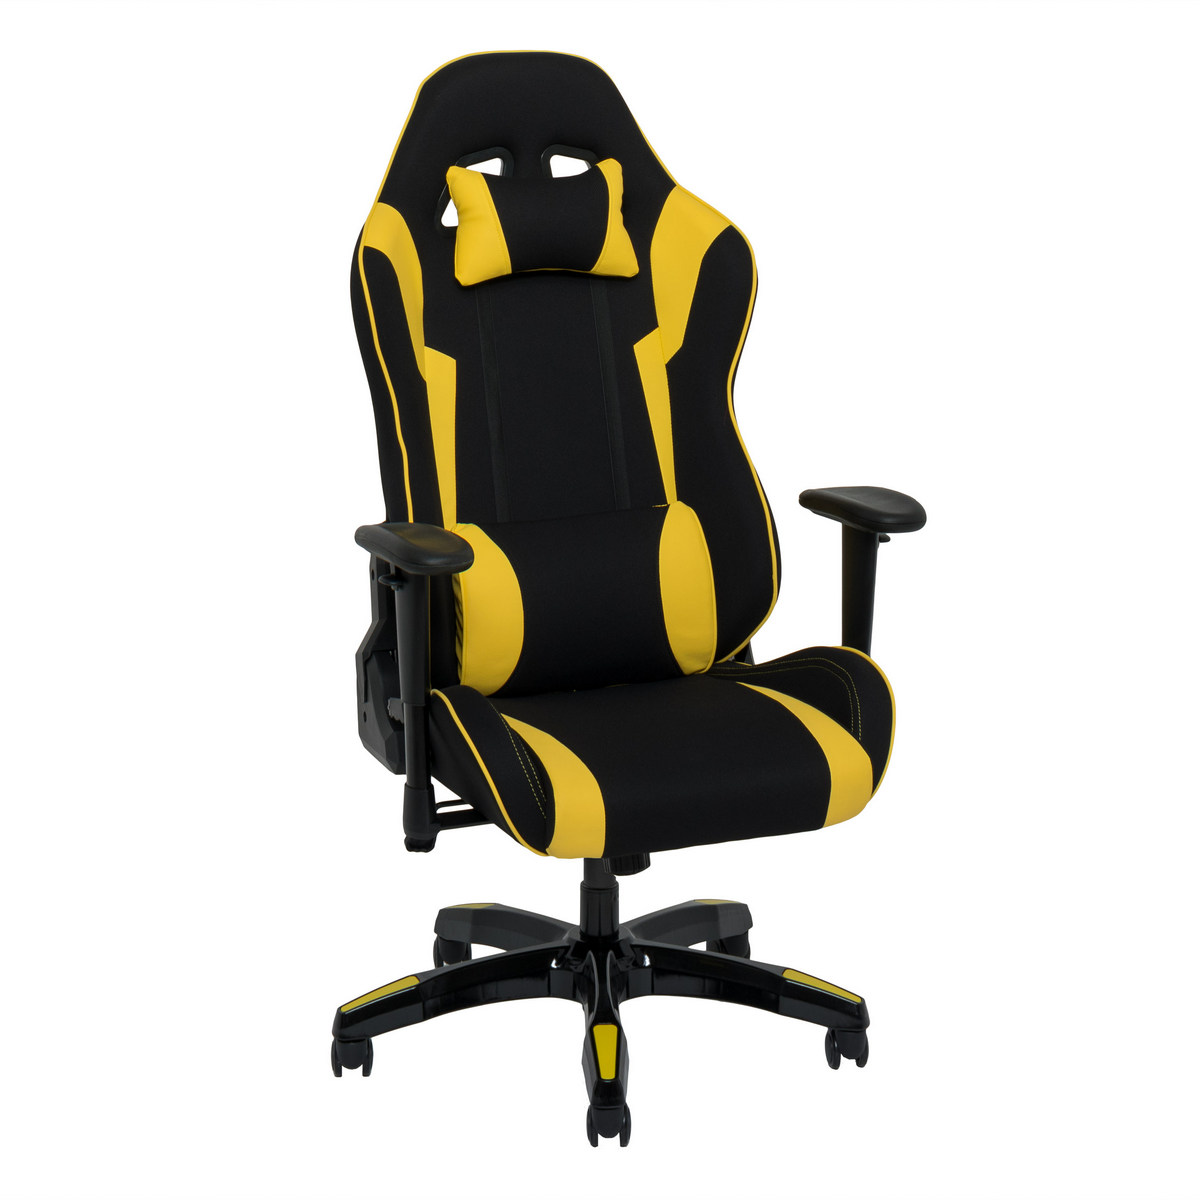 Corliving Lof-808-g Black & Yellow High Back Ergonomic Gaming Chair, Height Adjustable Arms